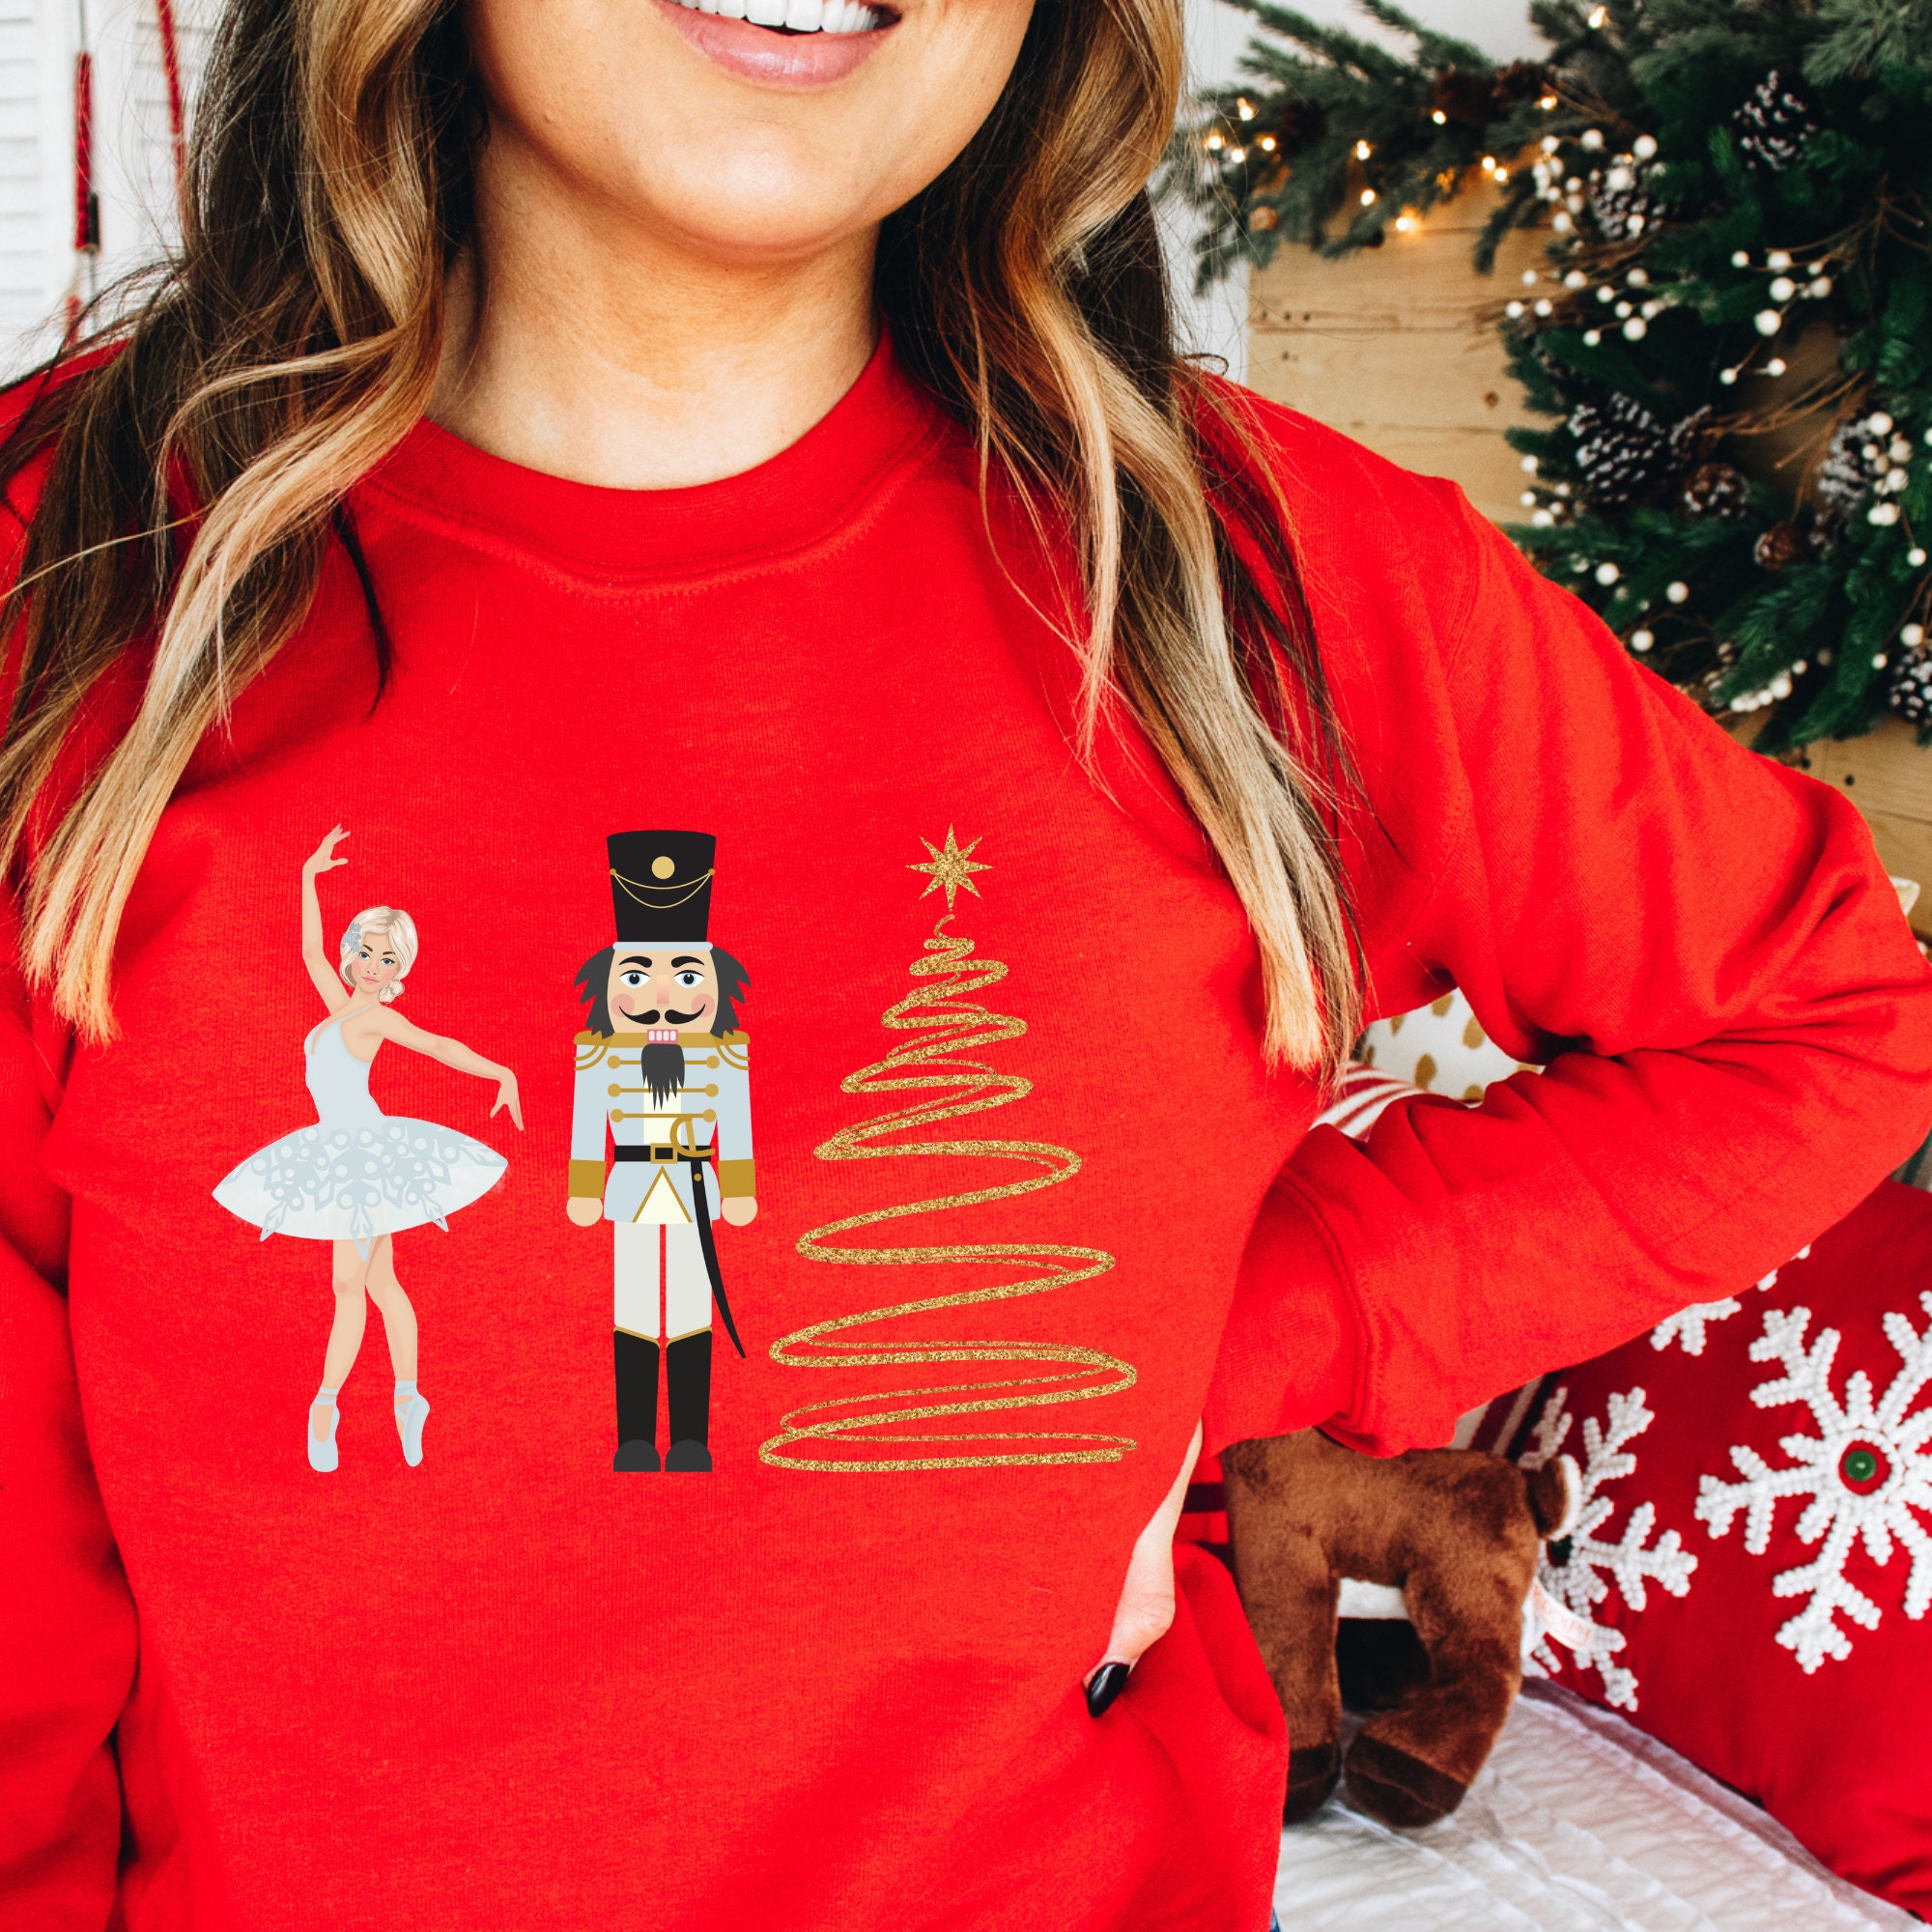 The Nutcracker Red Ugly Christmas Sweater Cute Christmas Gift